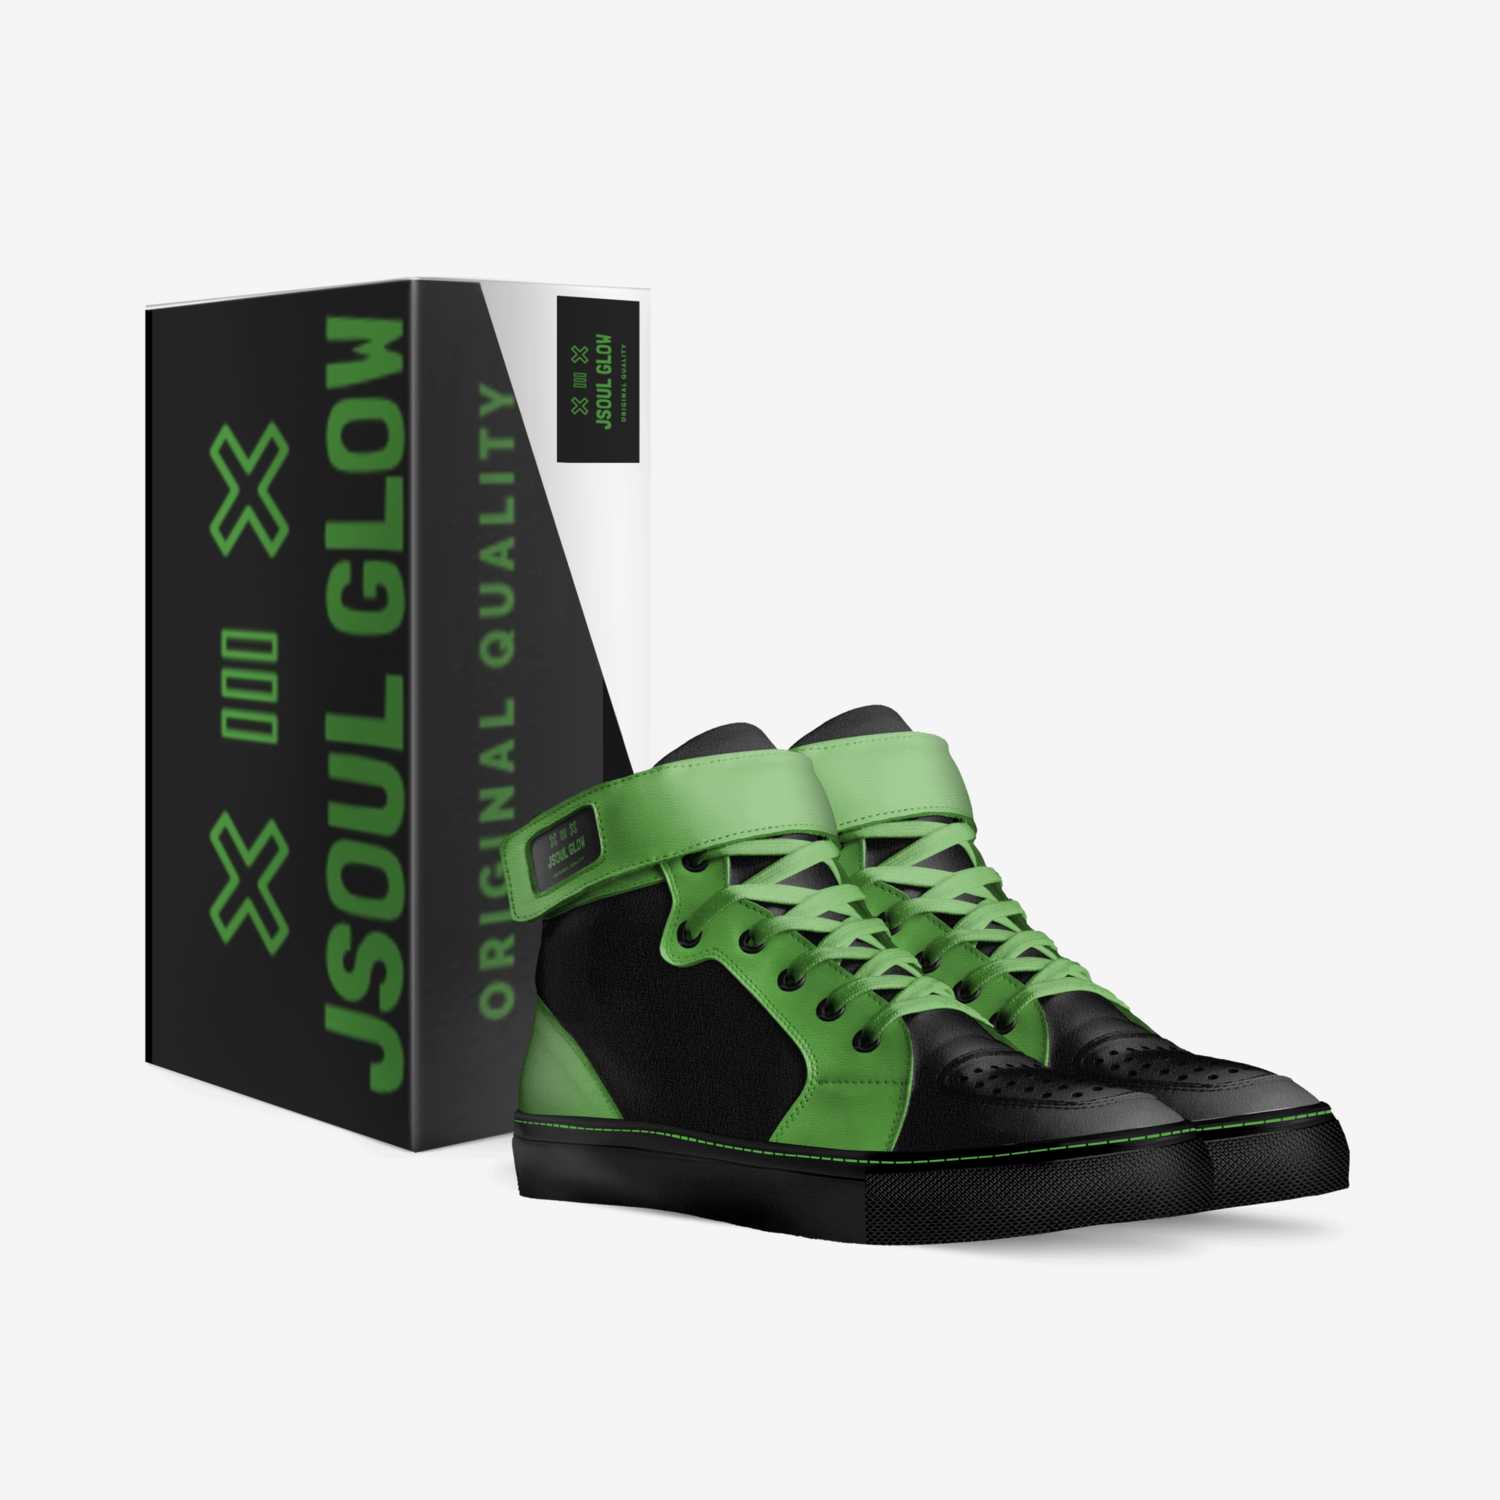 JSOUL Glow custom made in Italy shoes by Jsoul Shoes | Box view